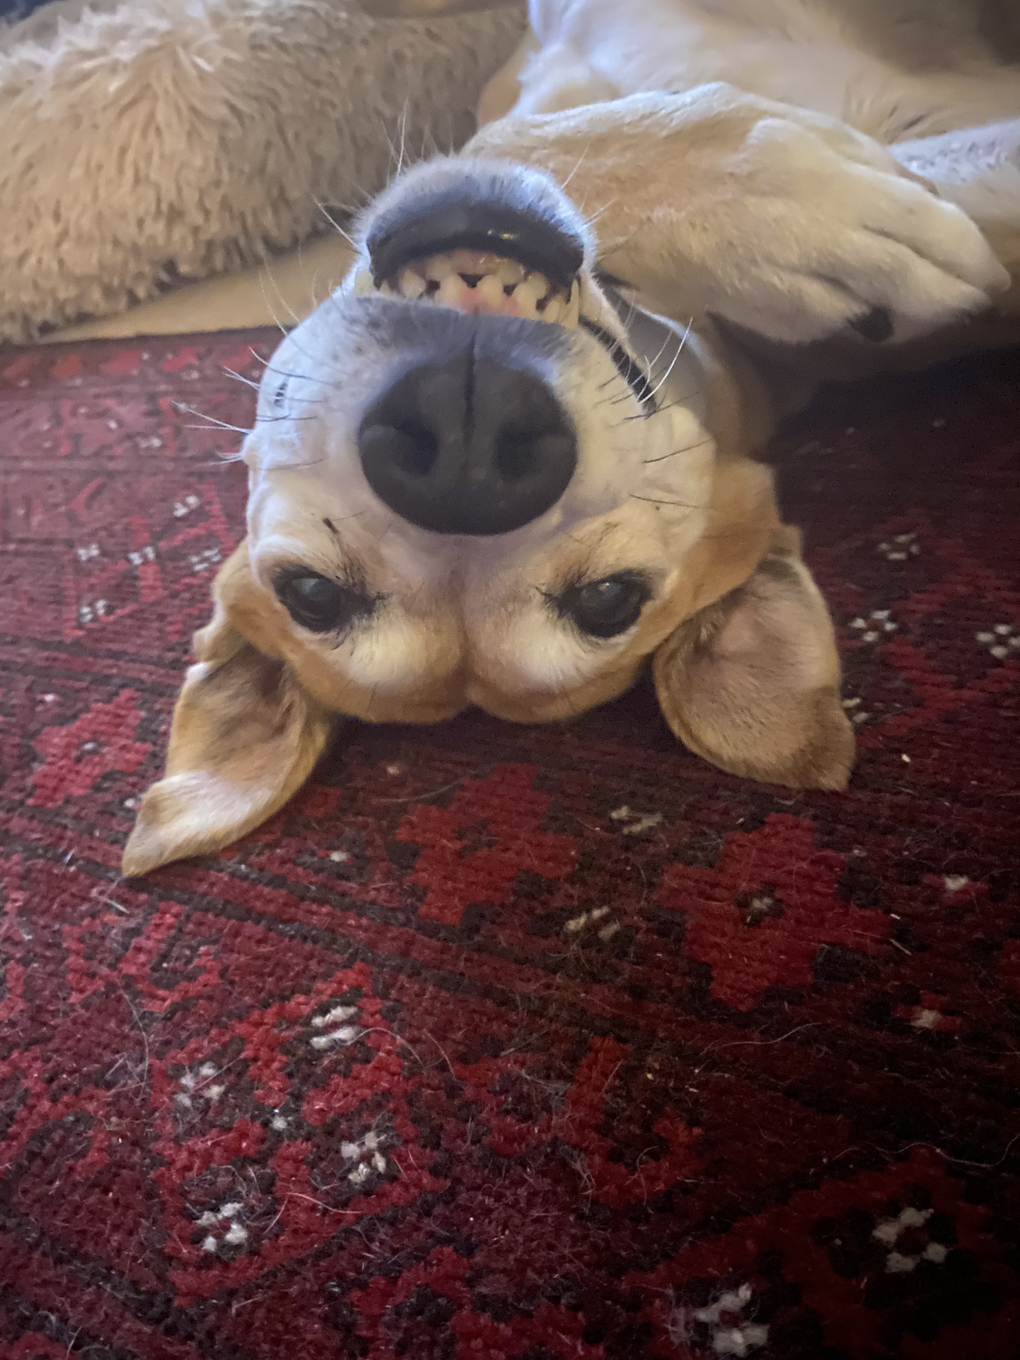 A dog lying upside down on a red patterned rug. The dog is looking straight at the camera.